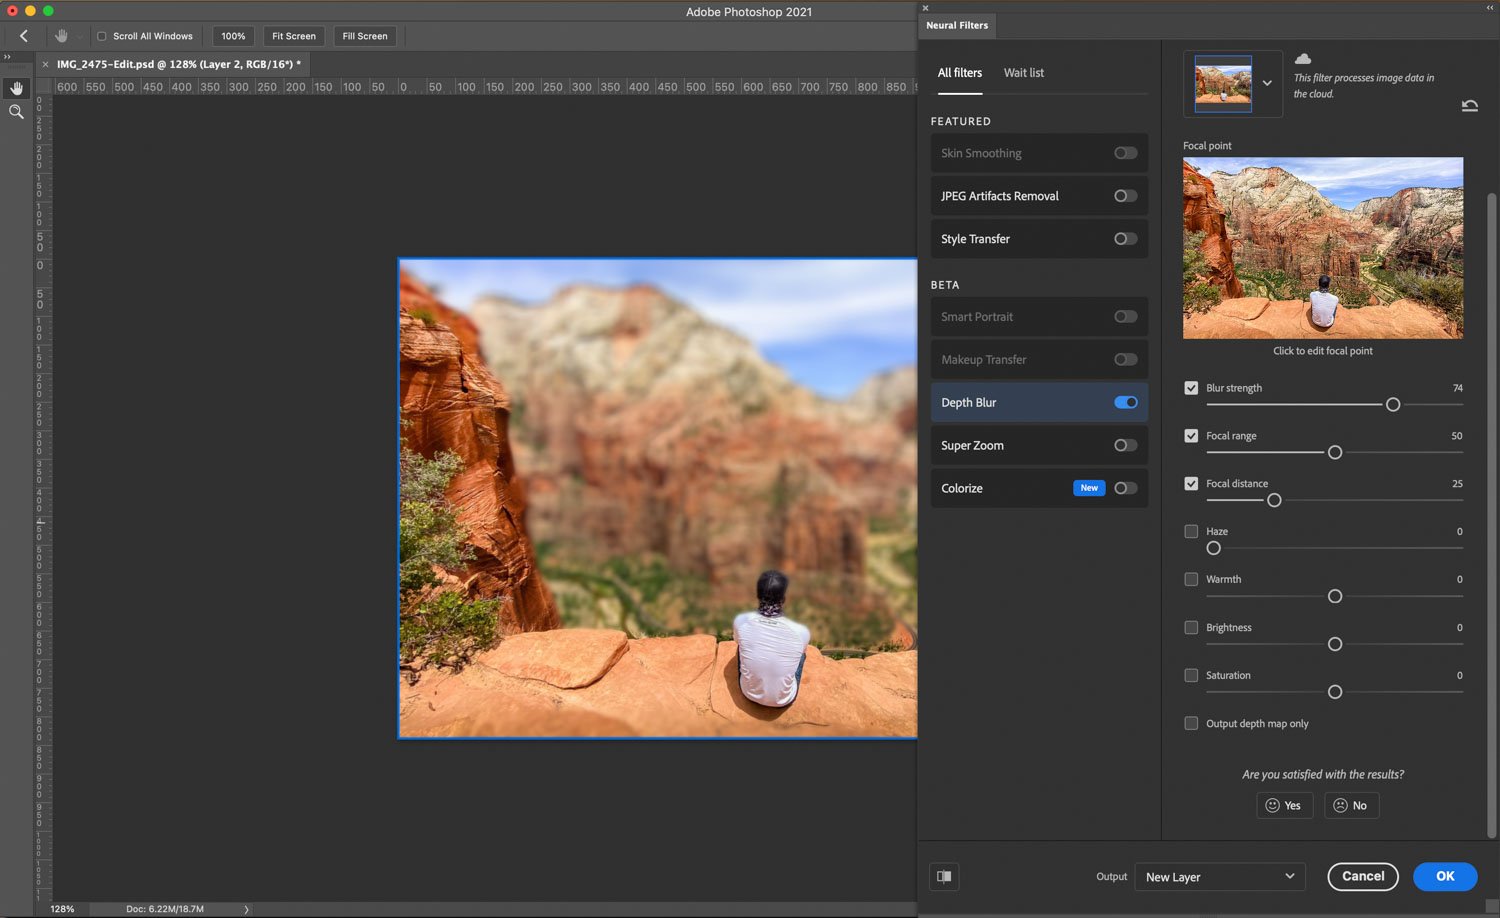 Adobe Updates Neural Filters, Brings 'Portrait Mode' To